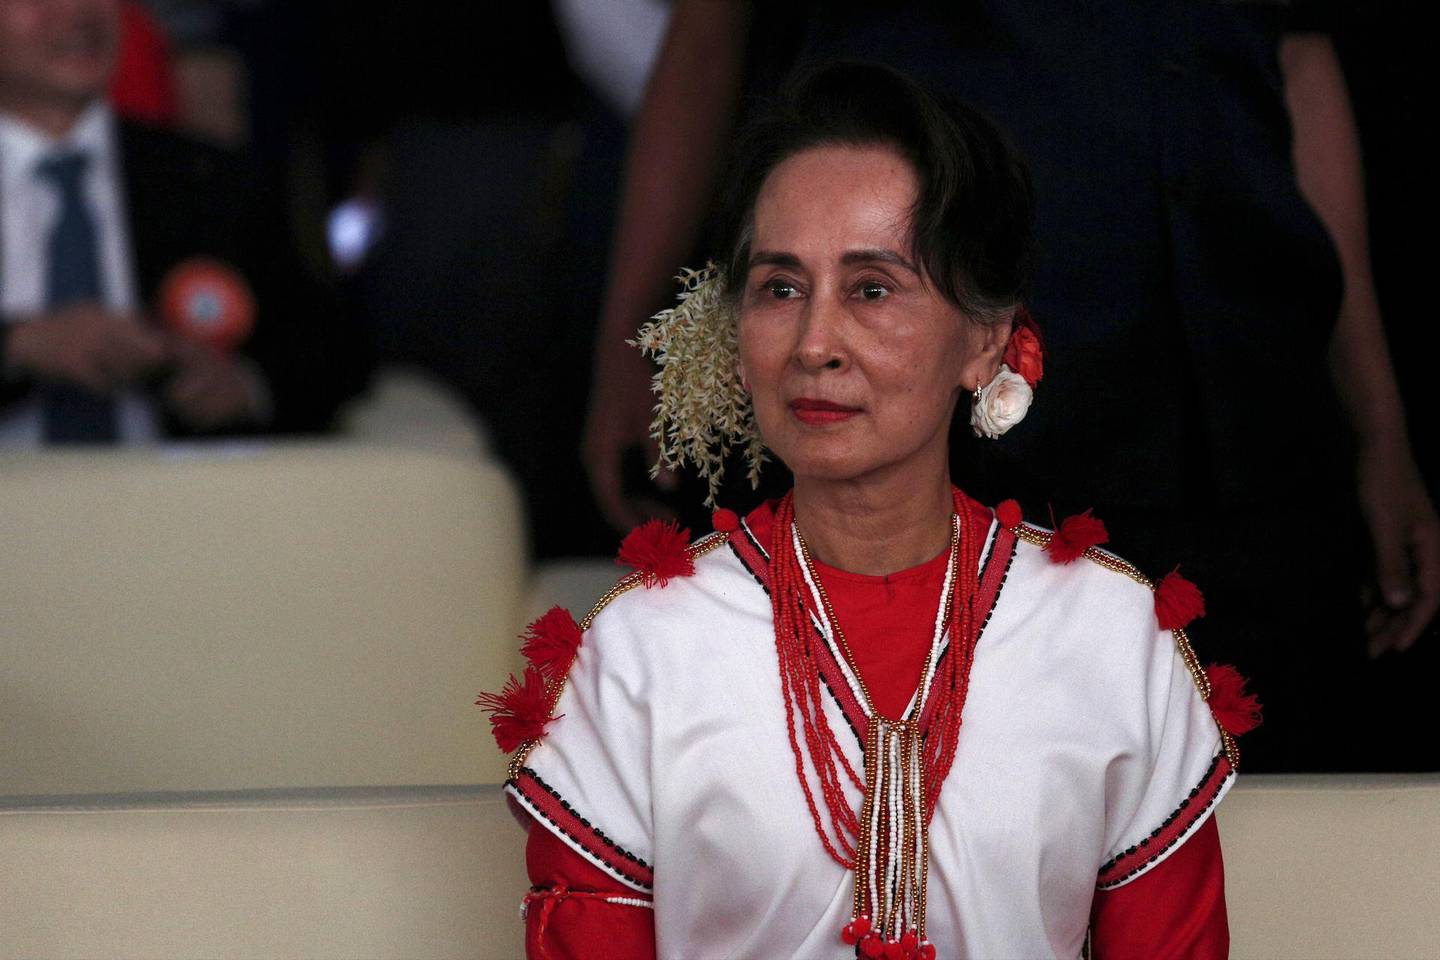 Myanmar State Counsellor Aung San Su Kyi attends the Myanmar Ethnics Culture Festival in Yangon on February 1, 2020. (Photo by Sai Aung Main / AFP)